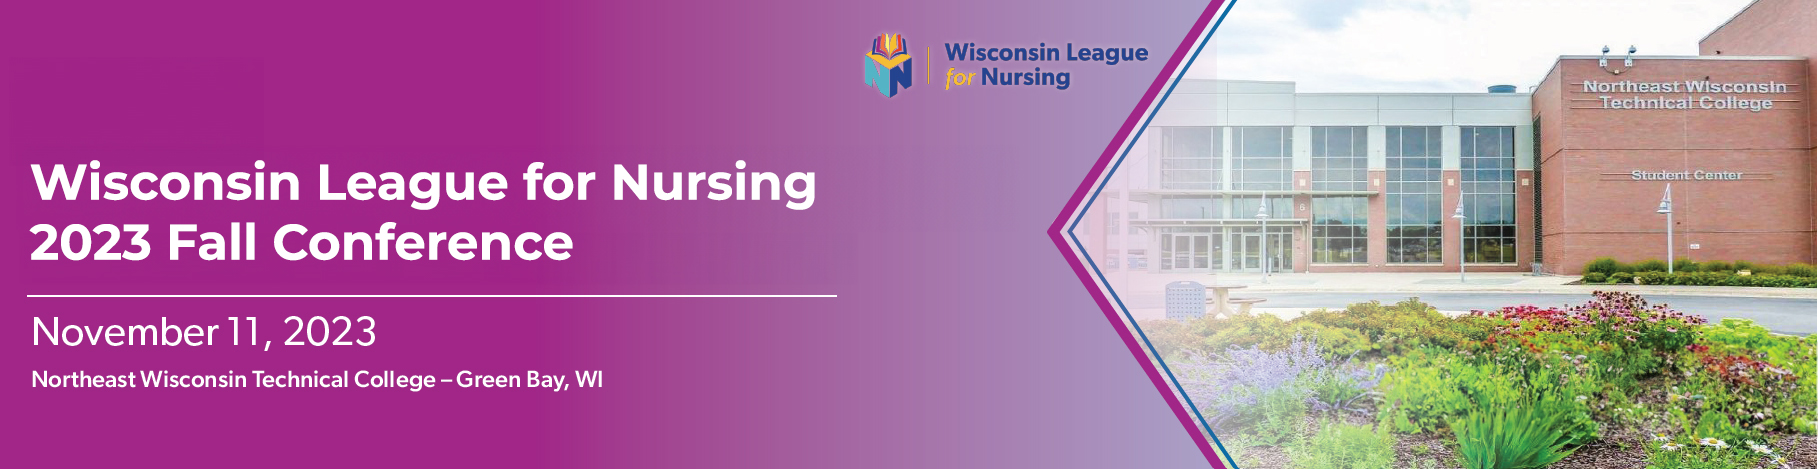 Intelligent Video Solutions is excited to be apart of the Wisconsin League for Nursing 2023 Conference